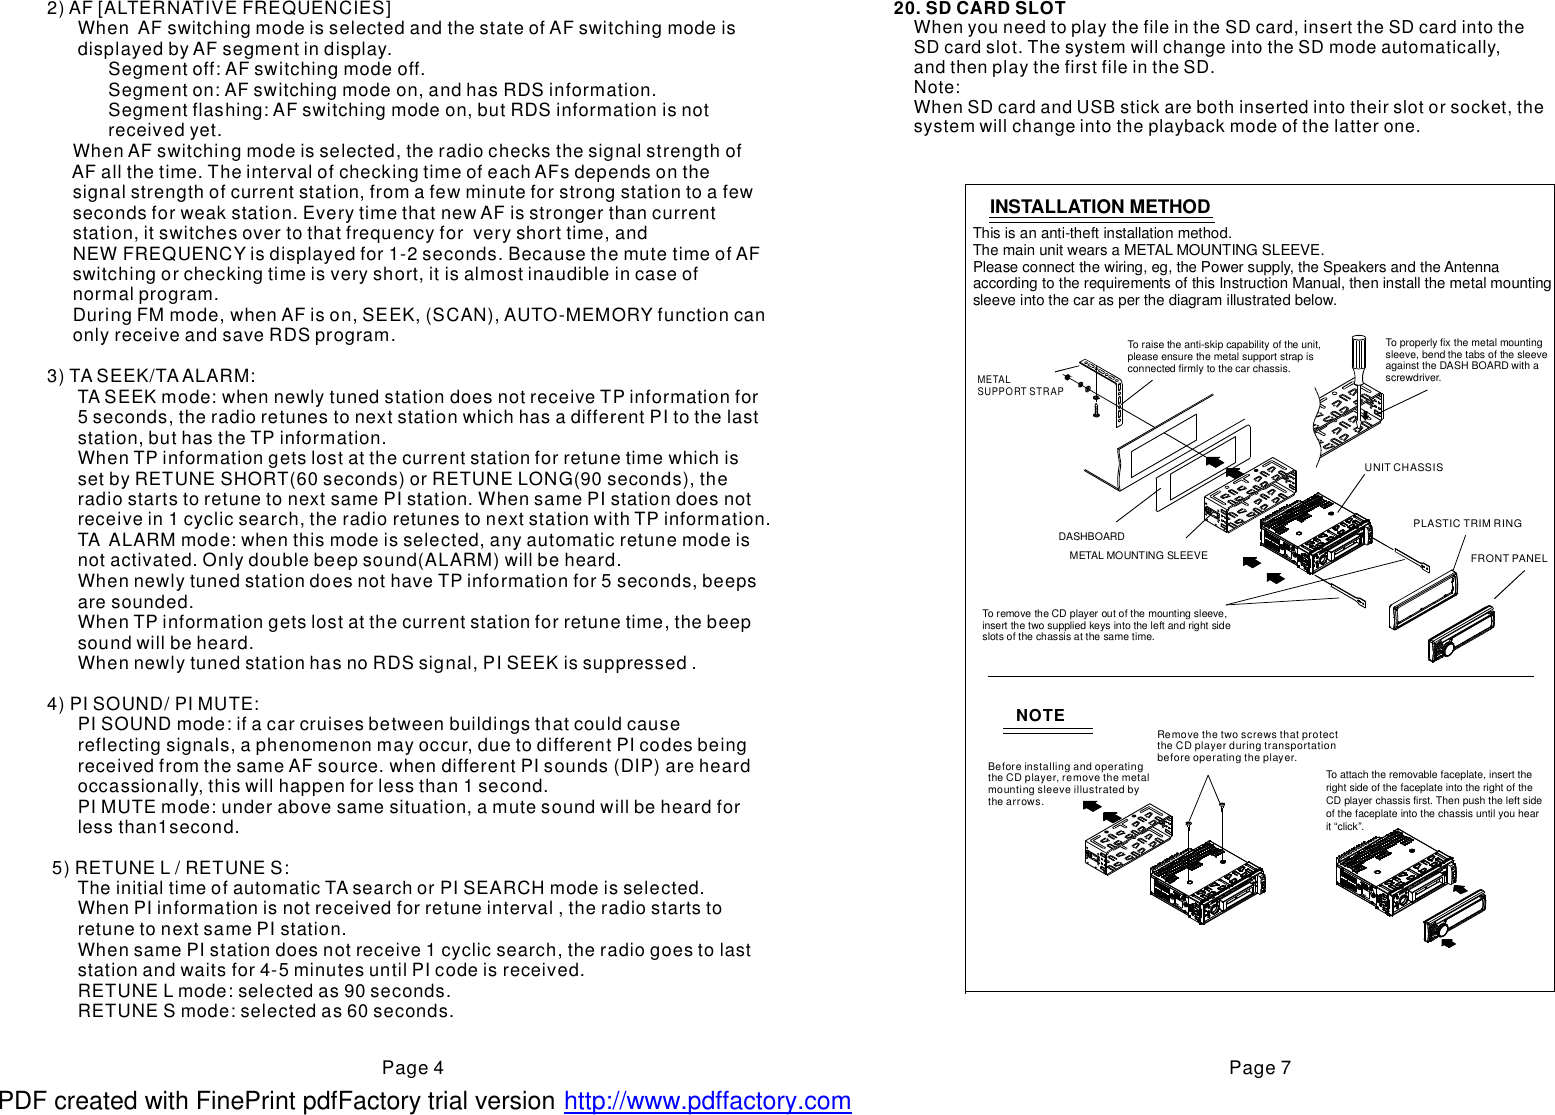 Page 4 of 5 - Boss-Audio-Systems Boss-Audio-Systems-Stereo-System-648Ua-Users-Manual- Boss 648BI Car Radio OWNER'S MANUAL Operating Instructions User  Boss-audio-systems-stereo-system-648ua-users-manual